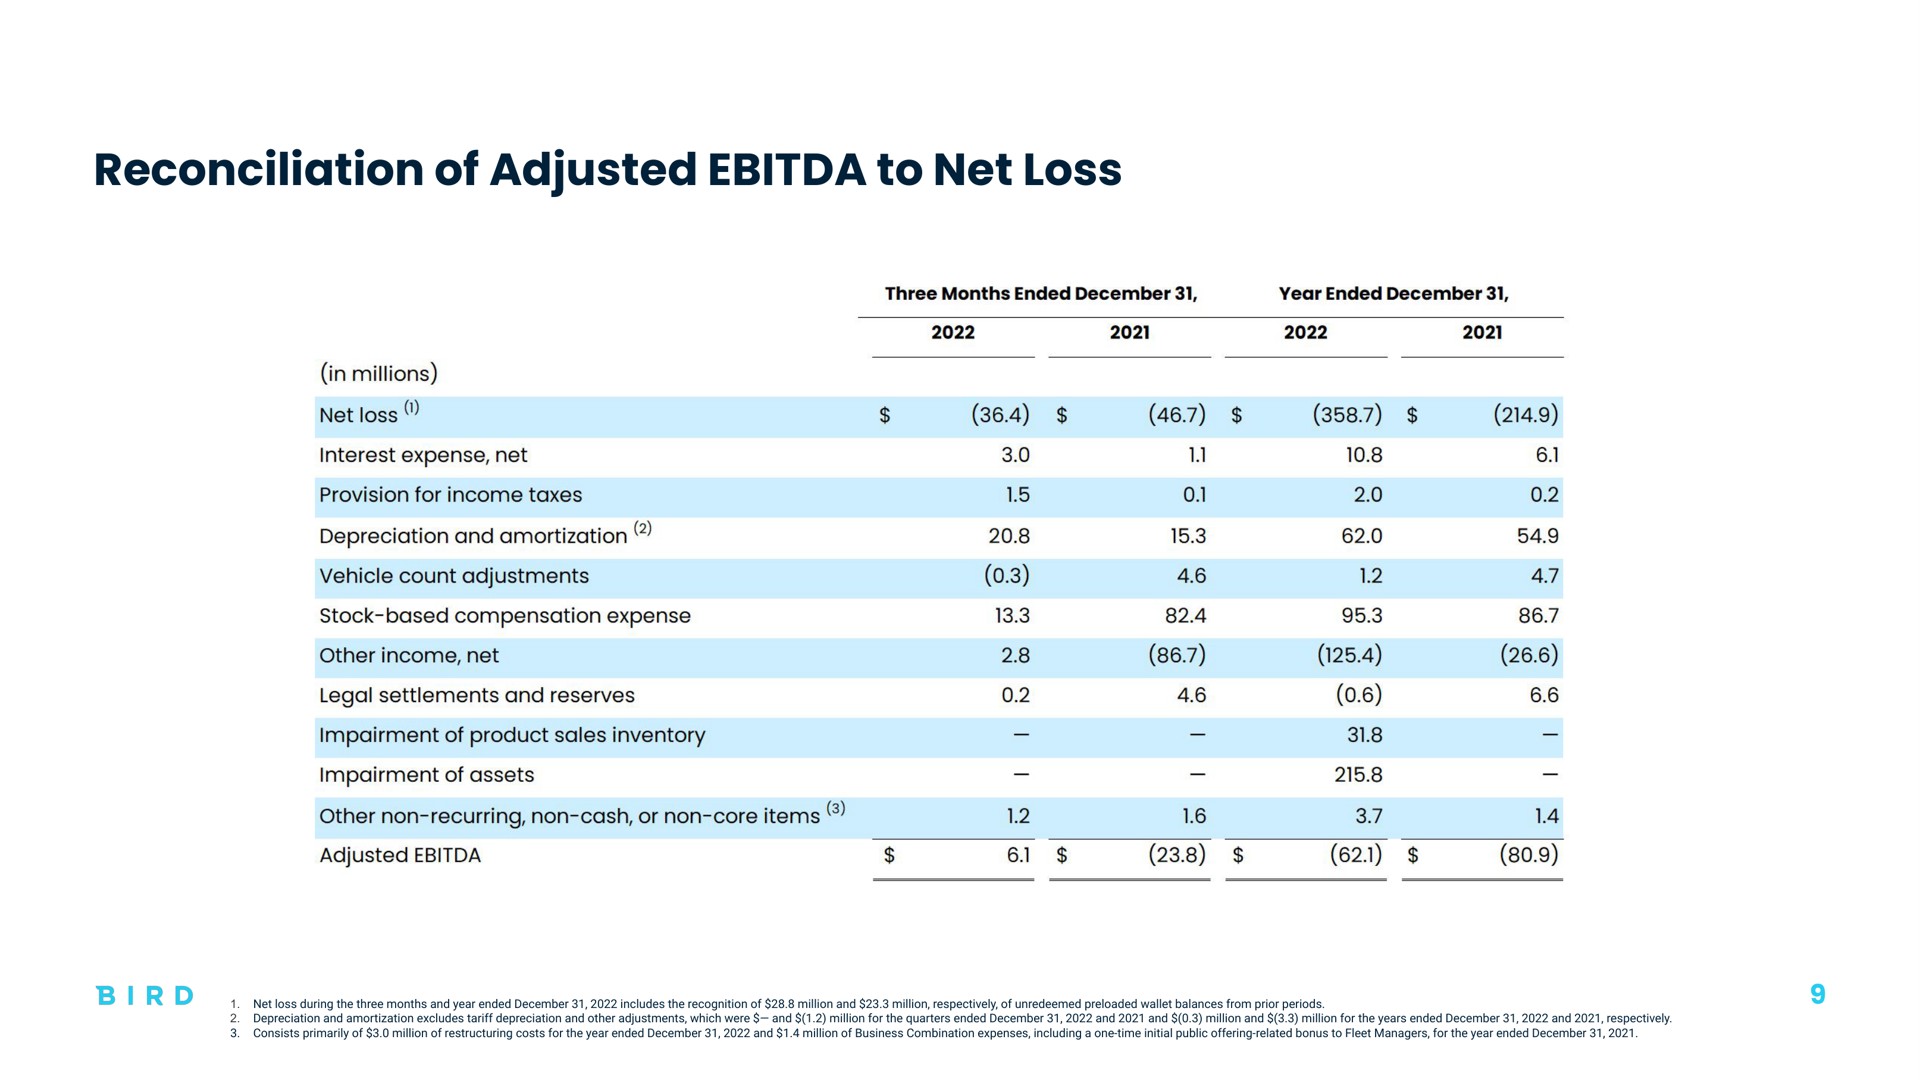 reconciliation of adjusted to net loss | Bird